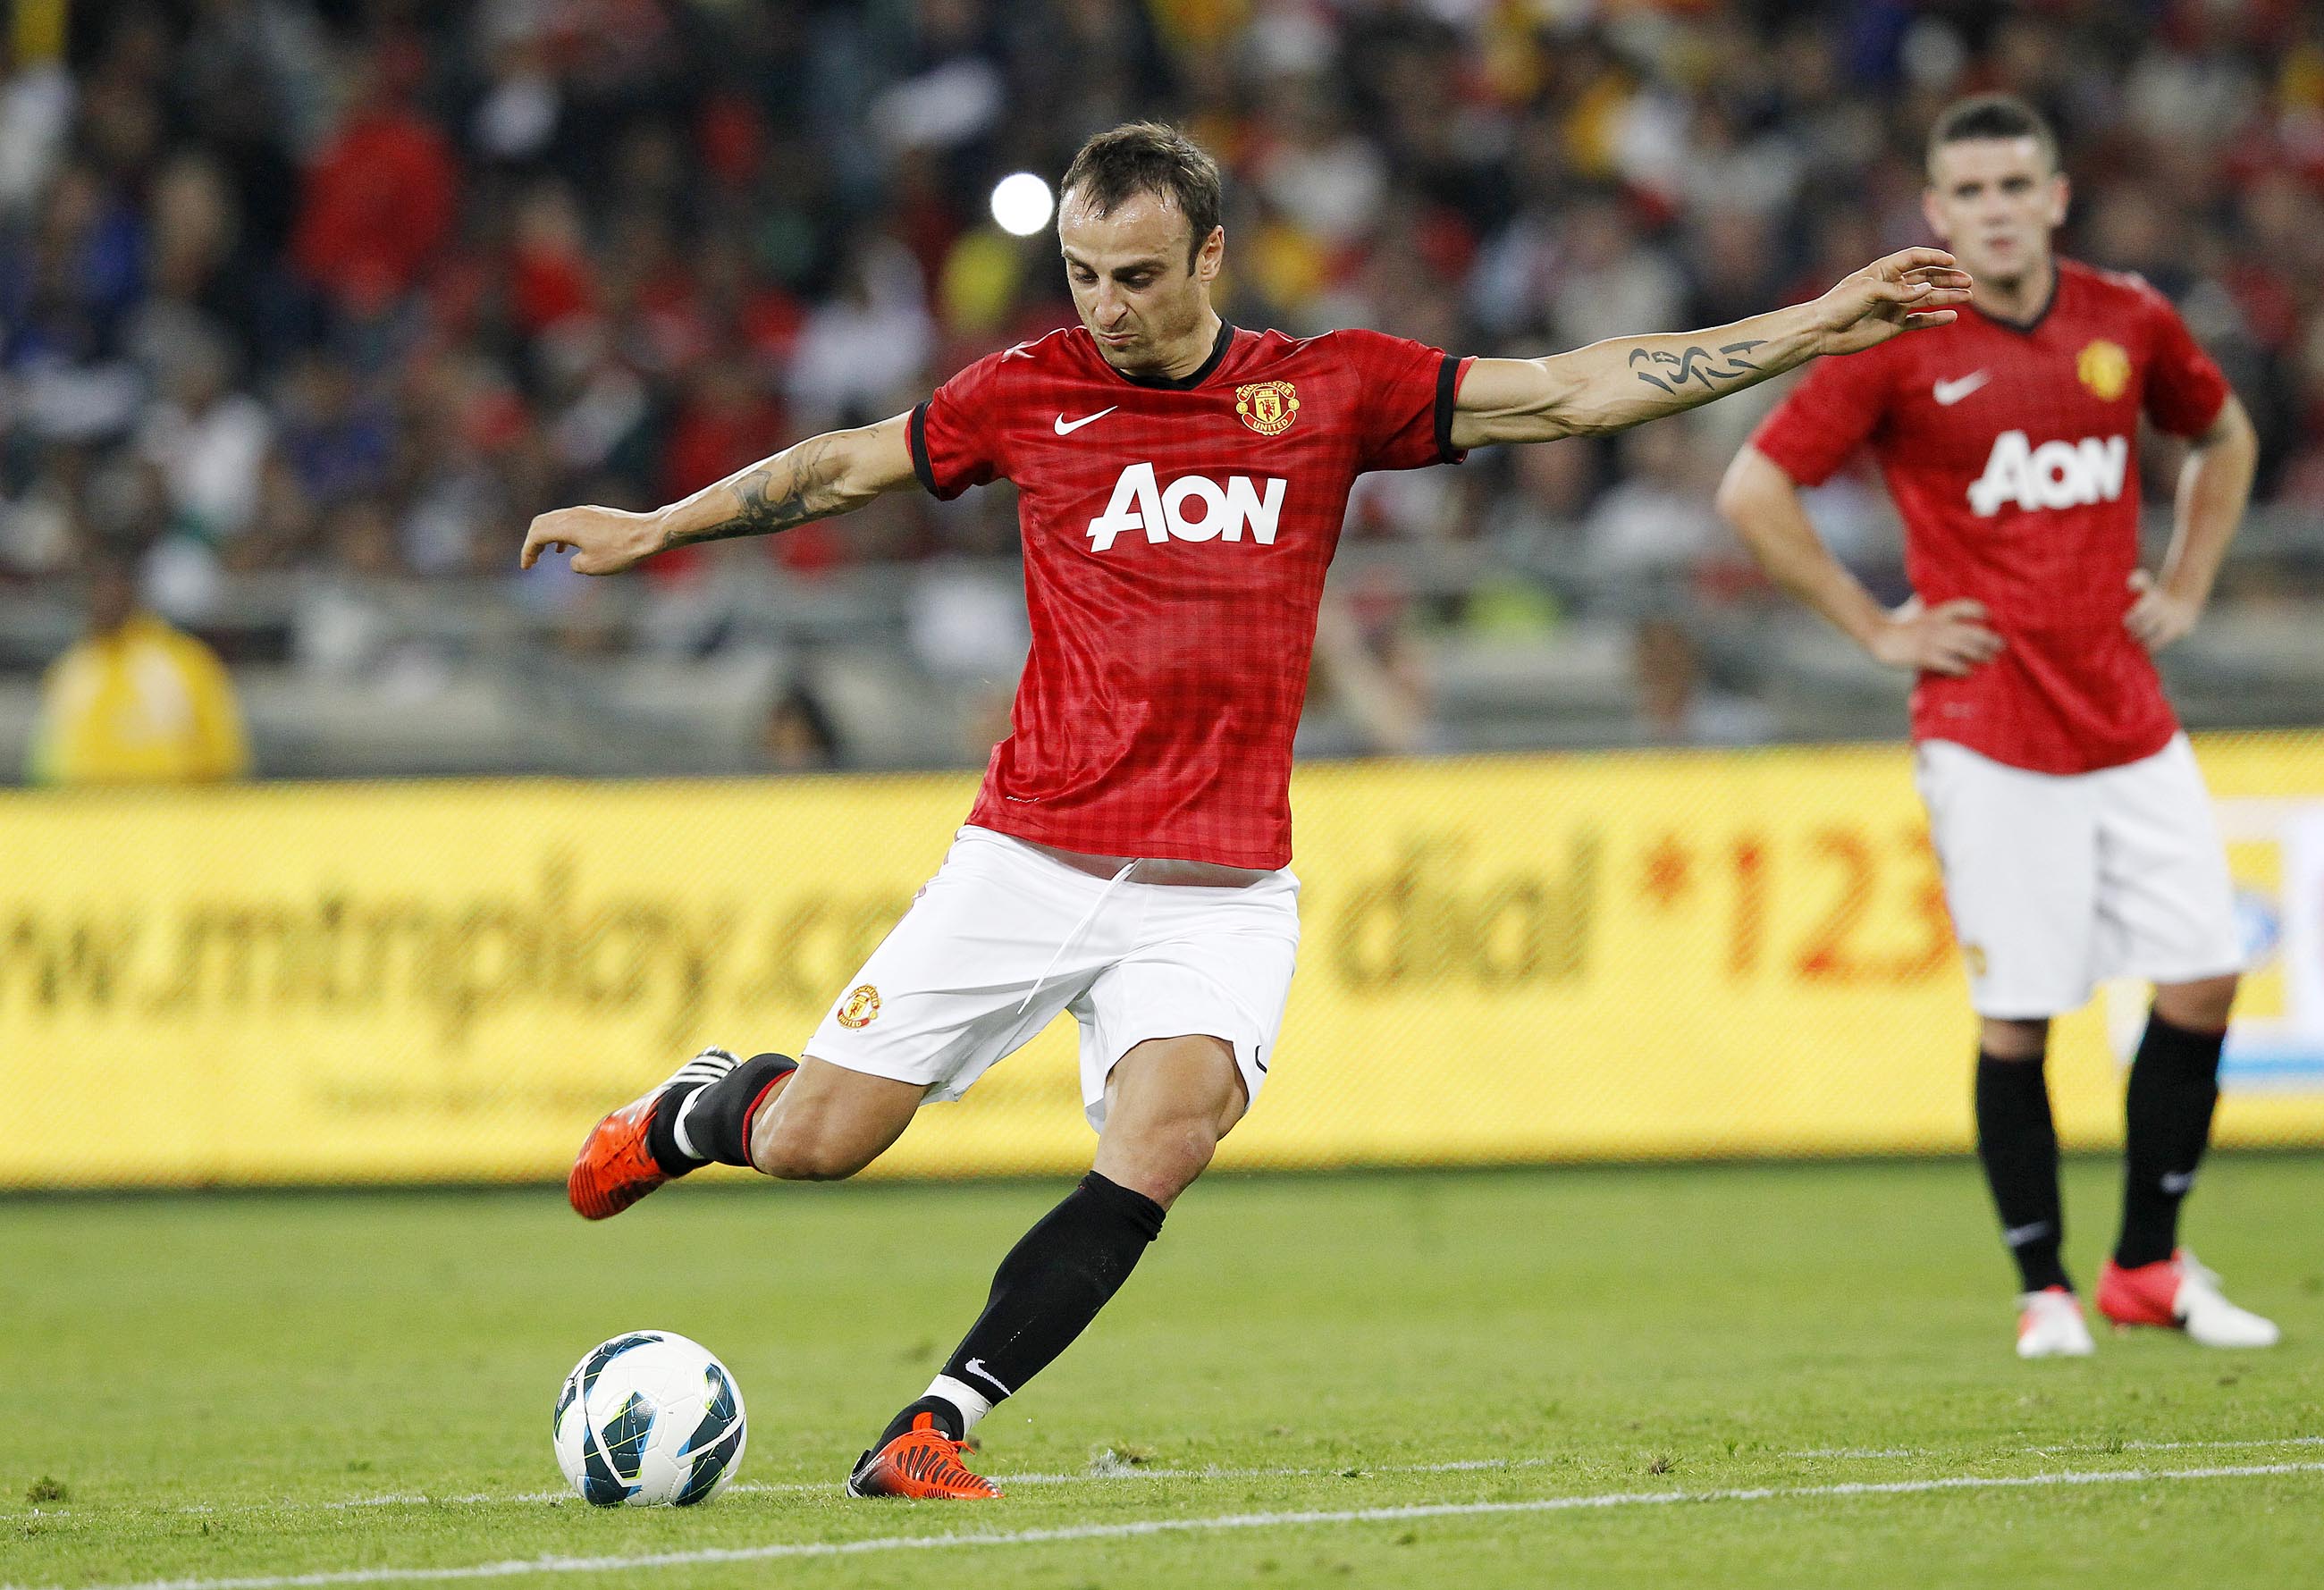 Bulgaria's Dimitar Berbatov, Manchester United's striker, shoots the ball during the MTN Football Invitational match against Amazulu at the Moses-Mabhida Stadium on July 18, 2012 in Durban. AFP PHOTO / ANESH DEBIKY        (Photo credit should read anesh debiky/AFP/GettyImages)